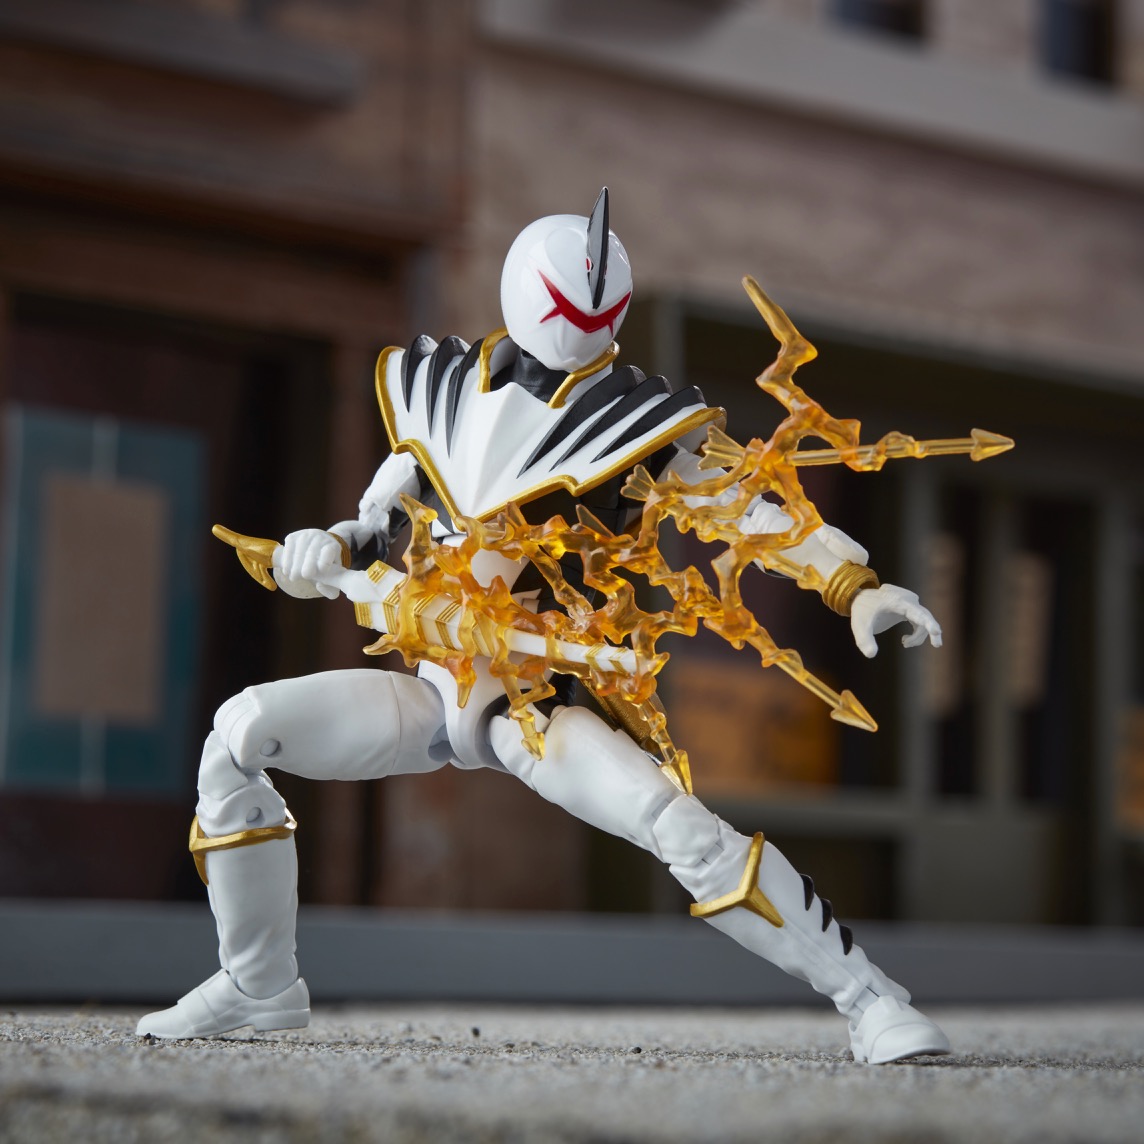 violación harto ducha POWER⚡️RANGERS on Twitter: "DRAGO POWER! WHITE RANGER! The Dino Thunder  White Ranger is now available exclusively at Walgreens! We apologize for  the deco issue and we're making it right! Go to https://t.co/aKChQjdbta